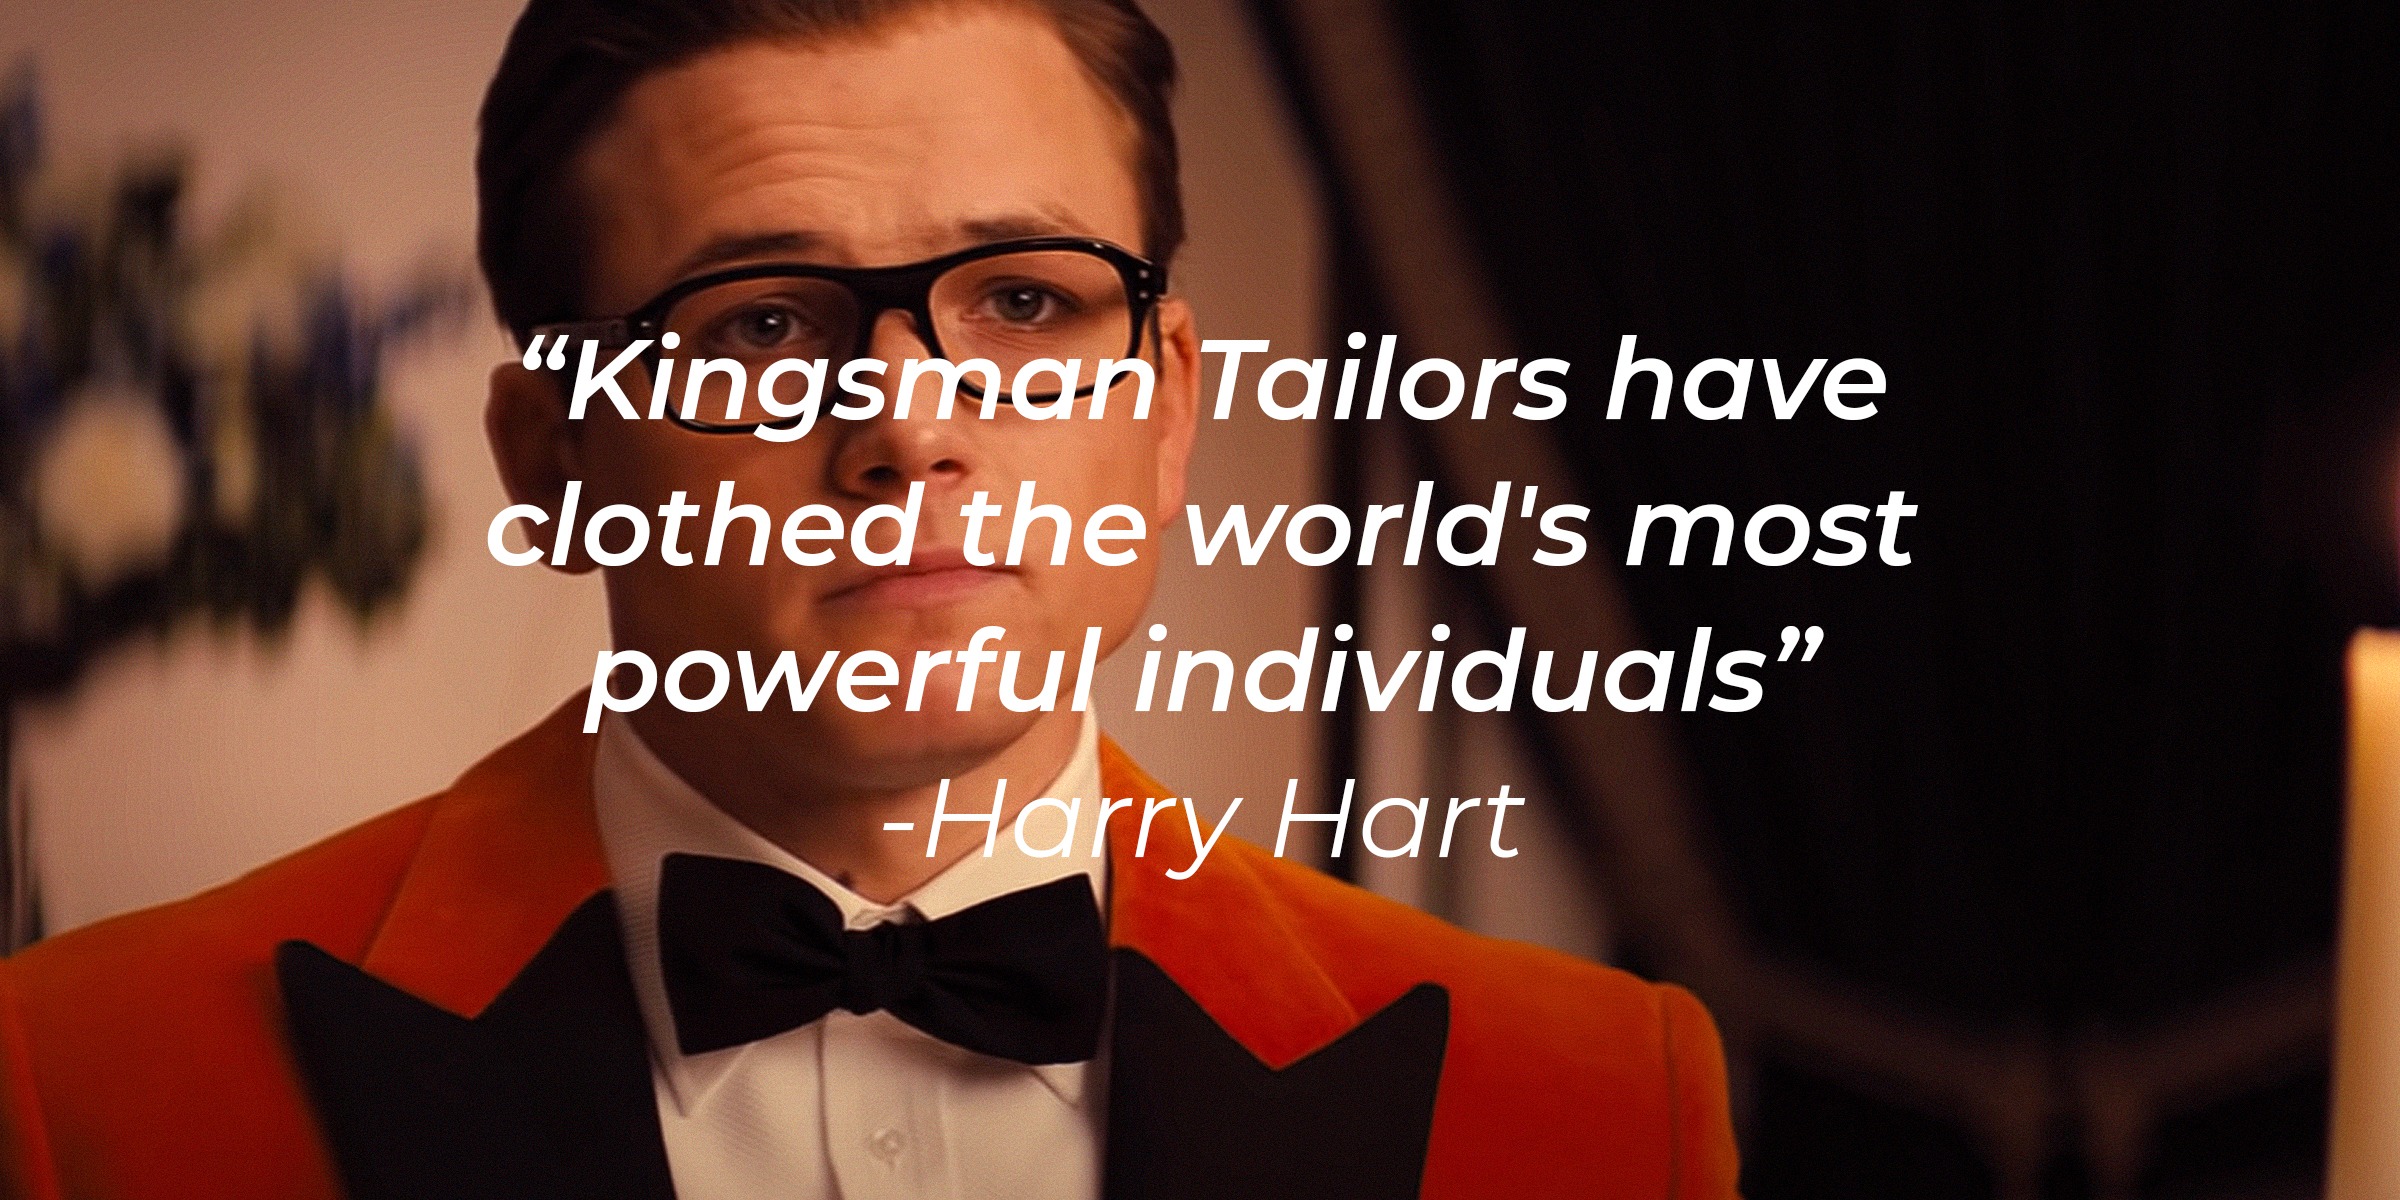 Harry Hart's quote: "Kingsman Tailors have clothed the world's most powerful individuals." | Image: YouTube / 20thCenturyStudios